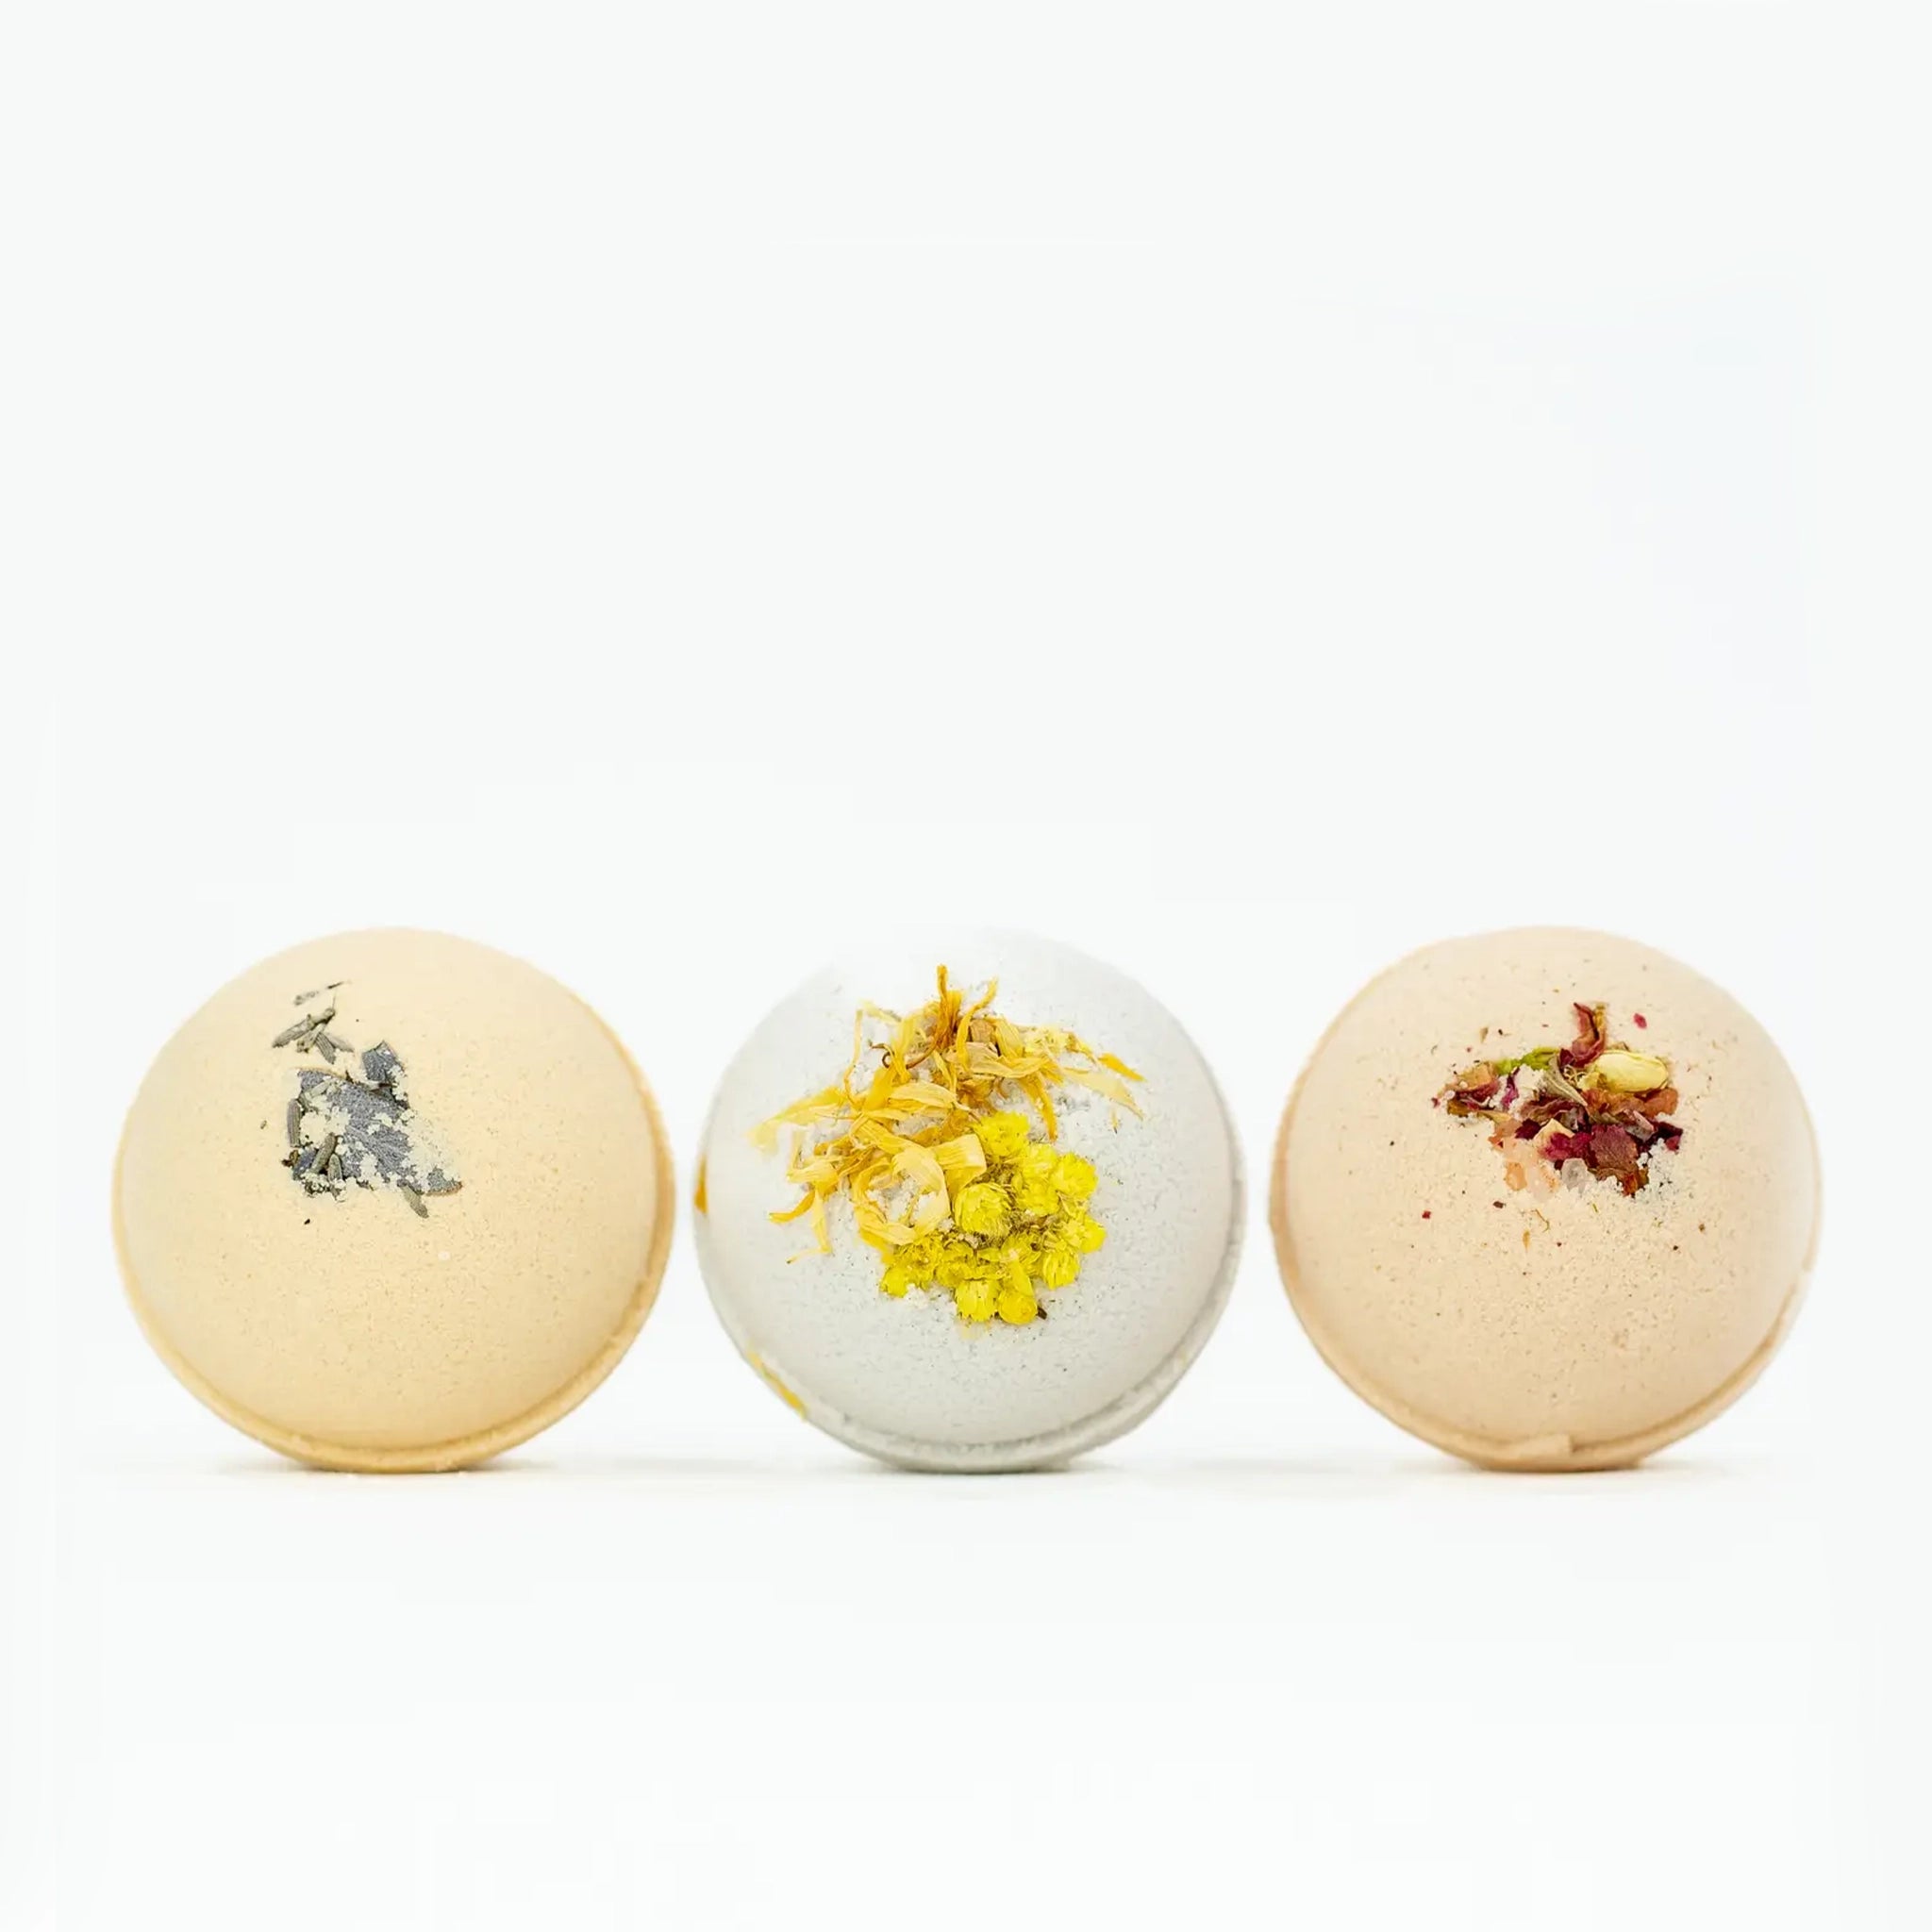 Three bath bombs out of their box in different scents also available on our website. 